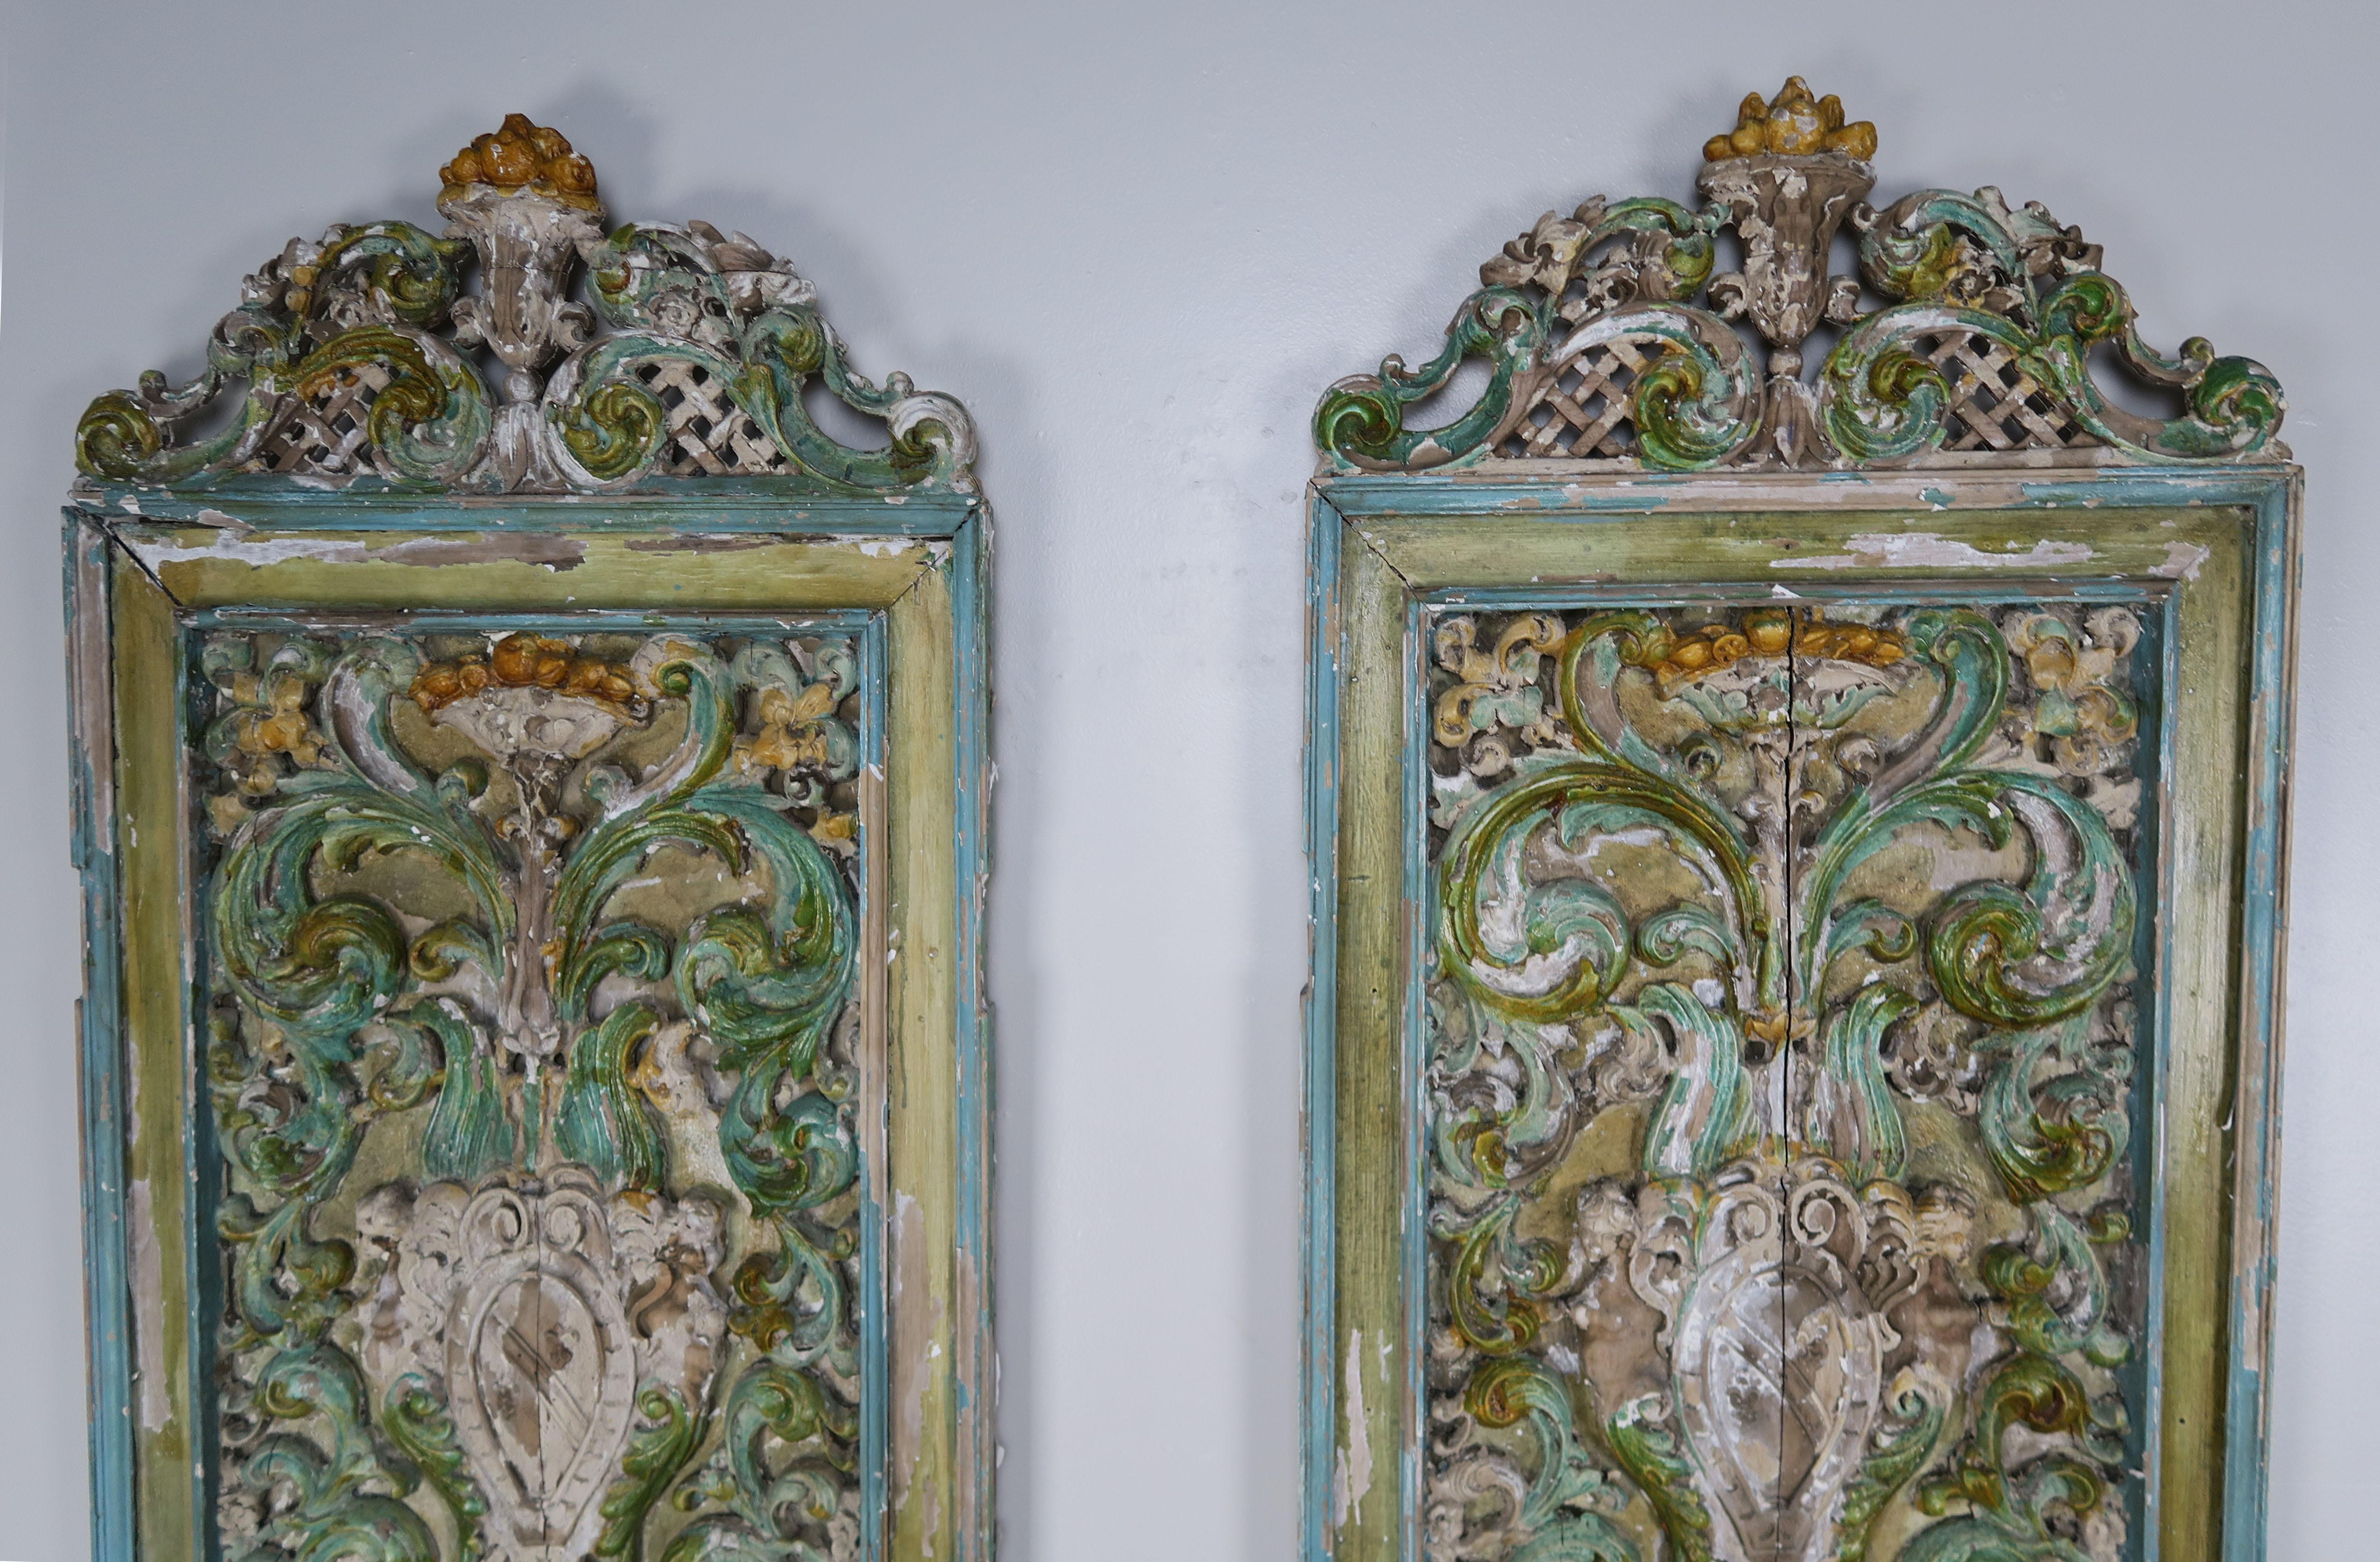 Pair of 19th century Italian carved and painted panels. The intricate carving depicts urns with swirling acanthus leaves throughout. Beautiful shades of greens, blues and golds. Ready to hang.
 